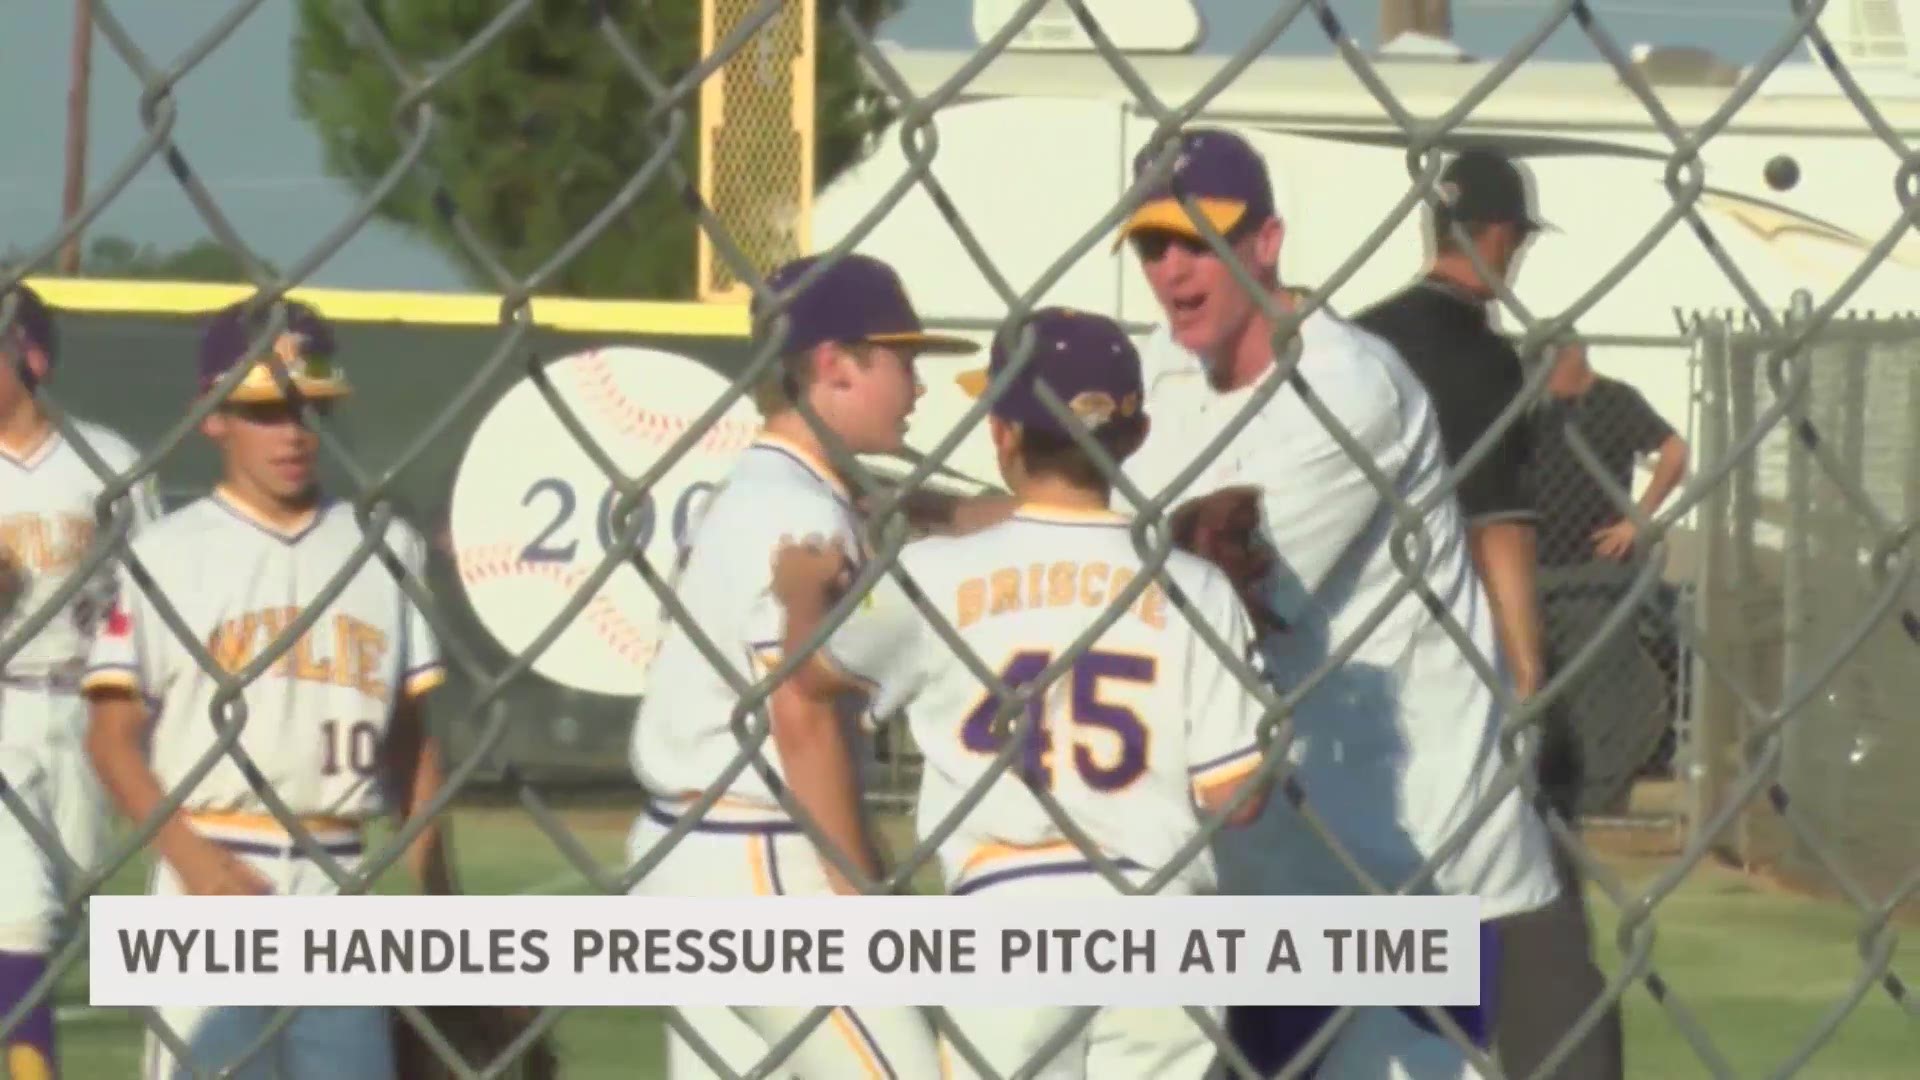 High caliber baseball has become the expectation at Wylie. Regardless of the level or venue, the Bulldogs are known for baseball success. There's pressure to succeed, even for the Little League Bulldogs. However, they're taking on that pressure one pitch